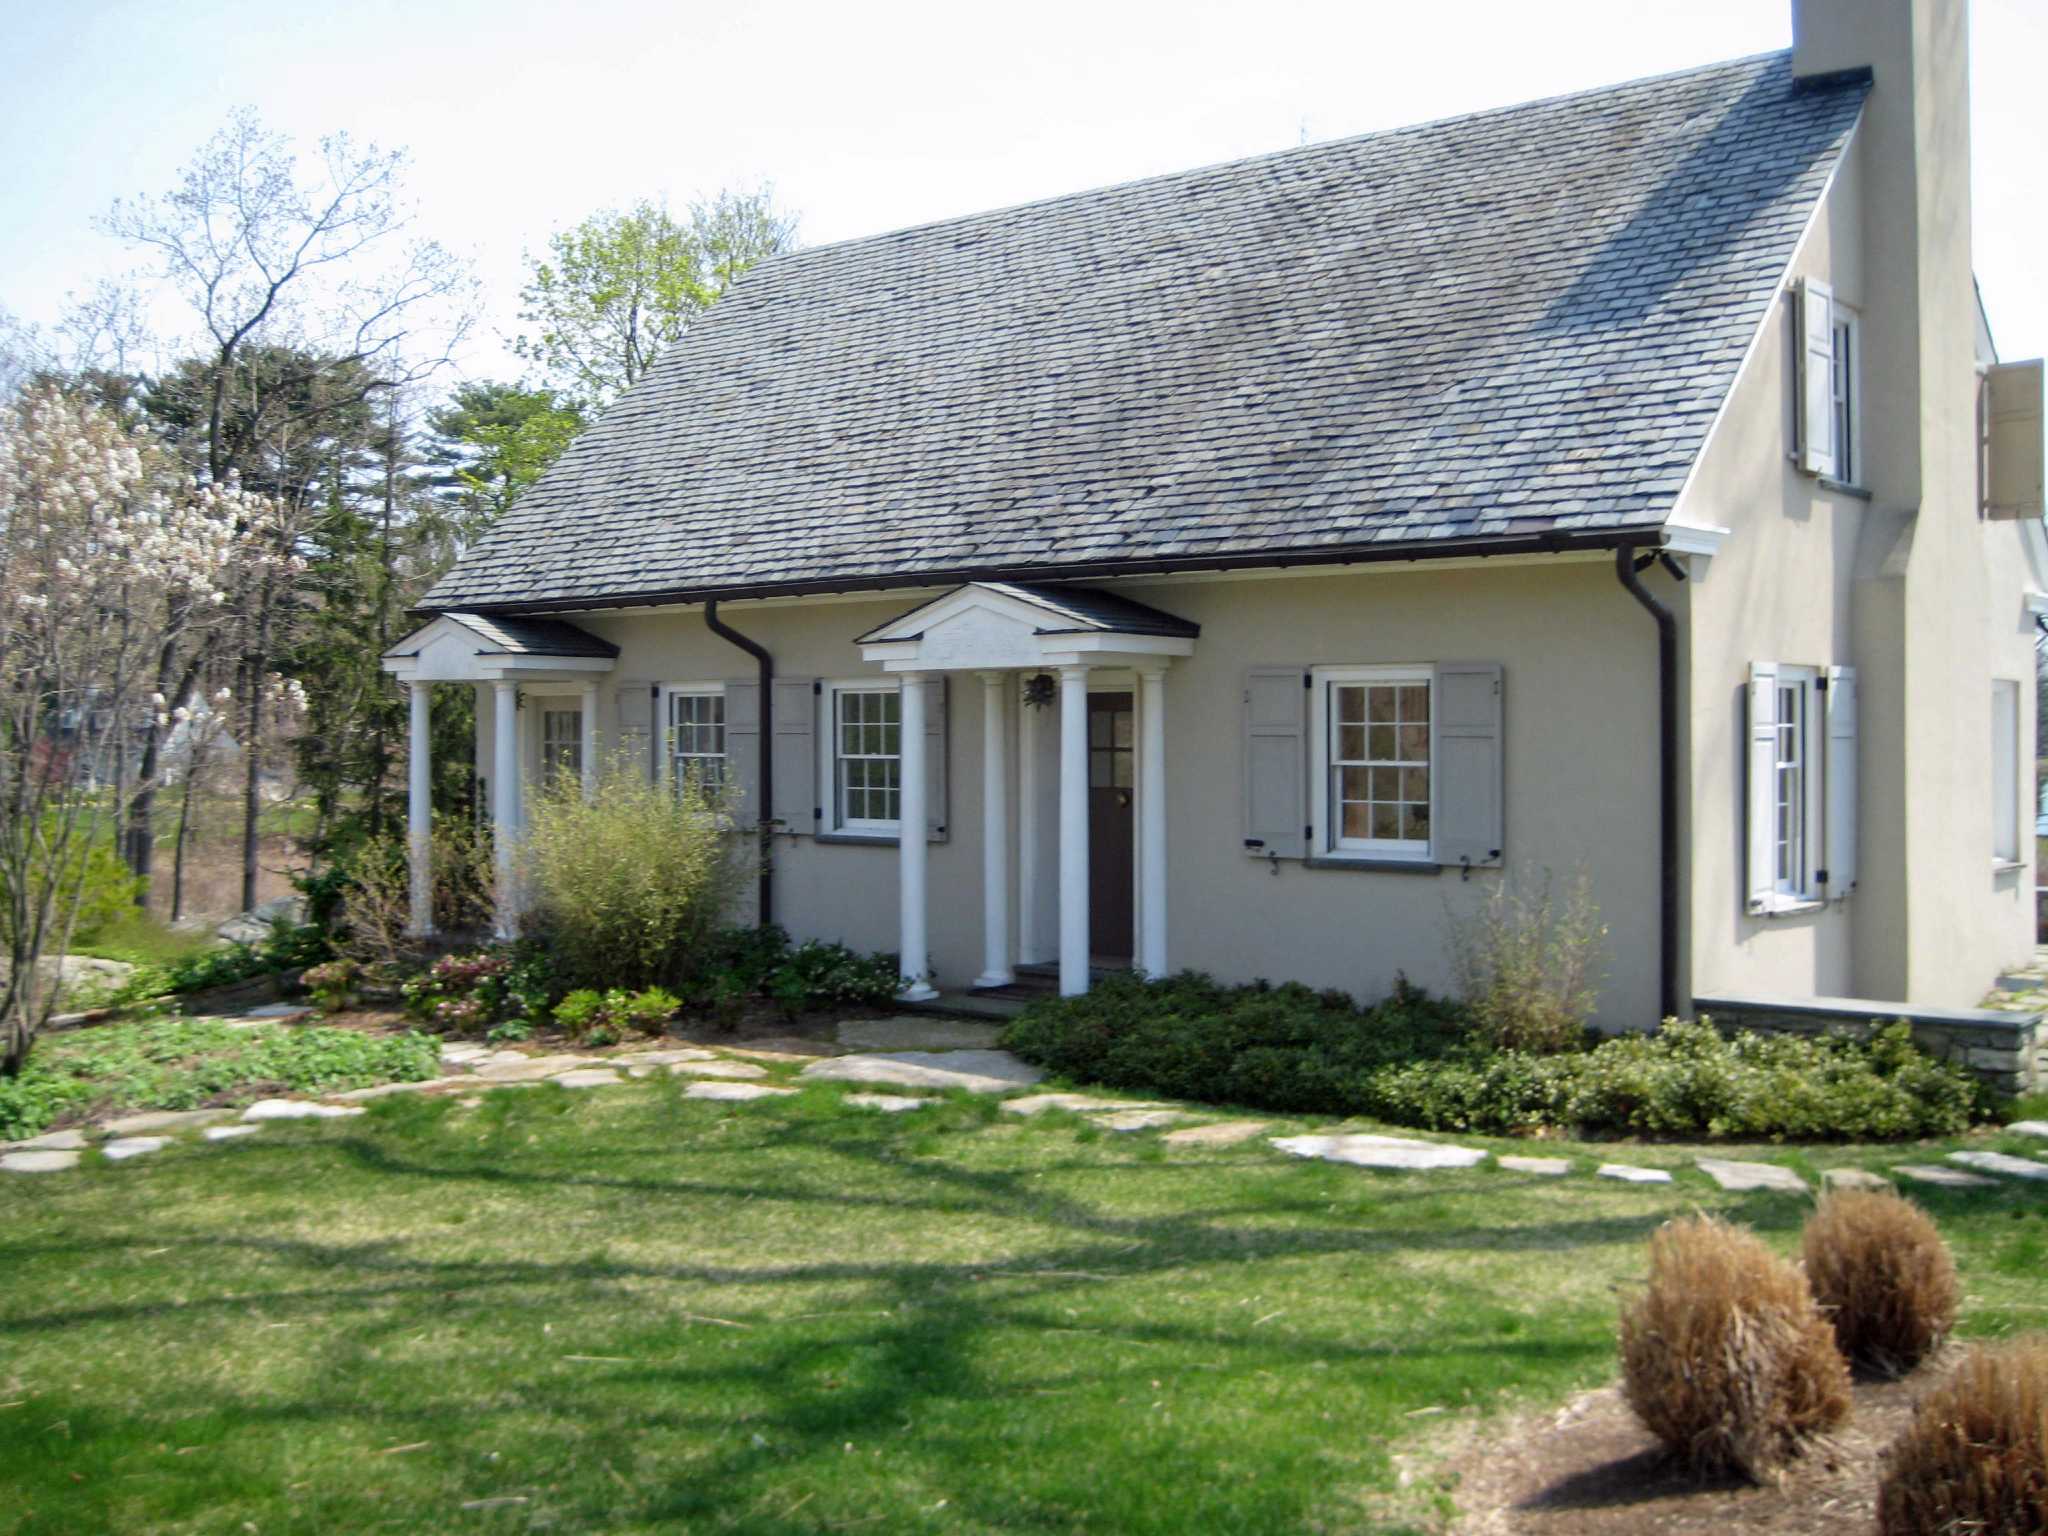  Seaside cottage  with famous roots Darien News